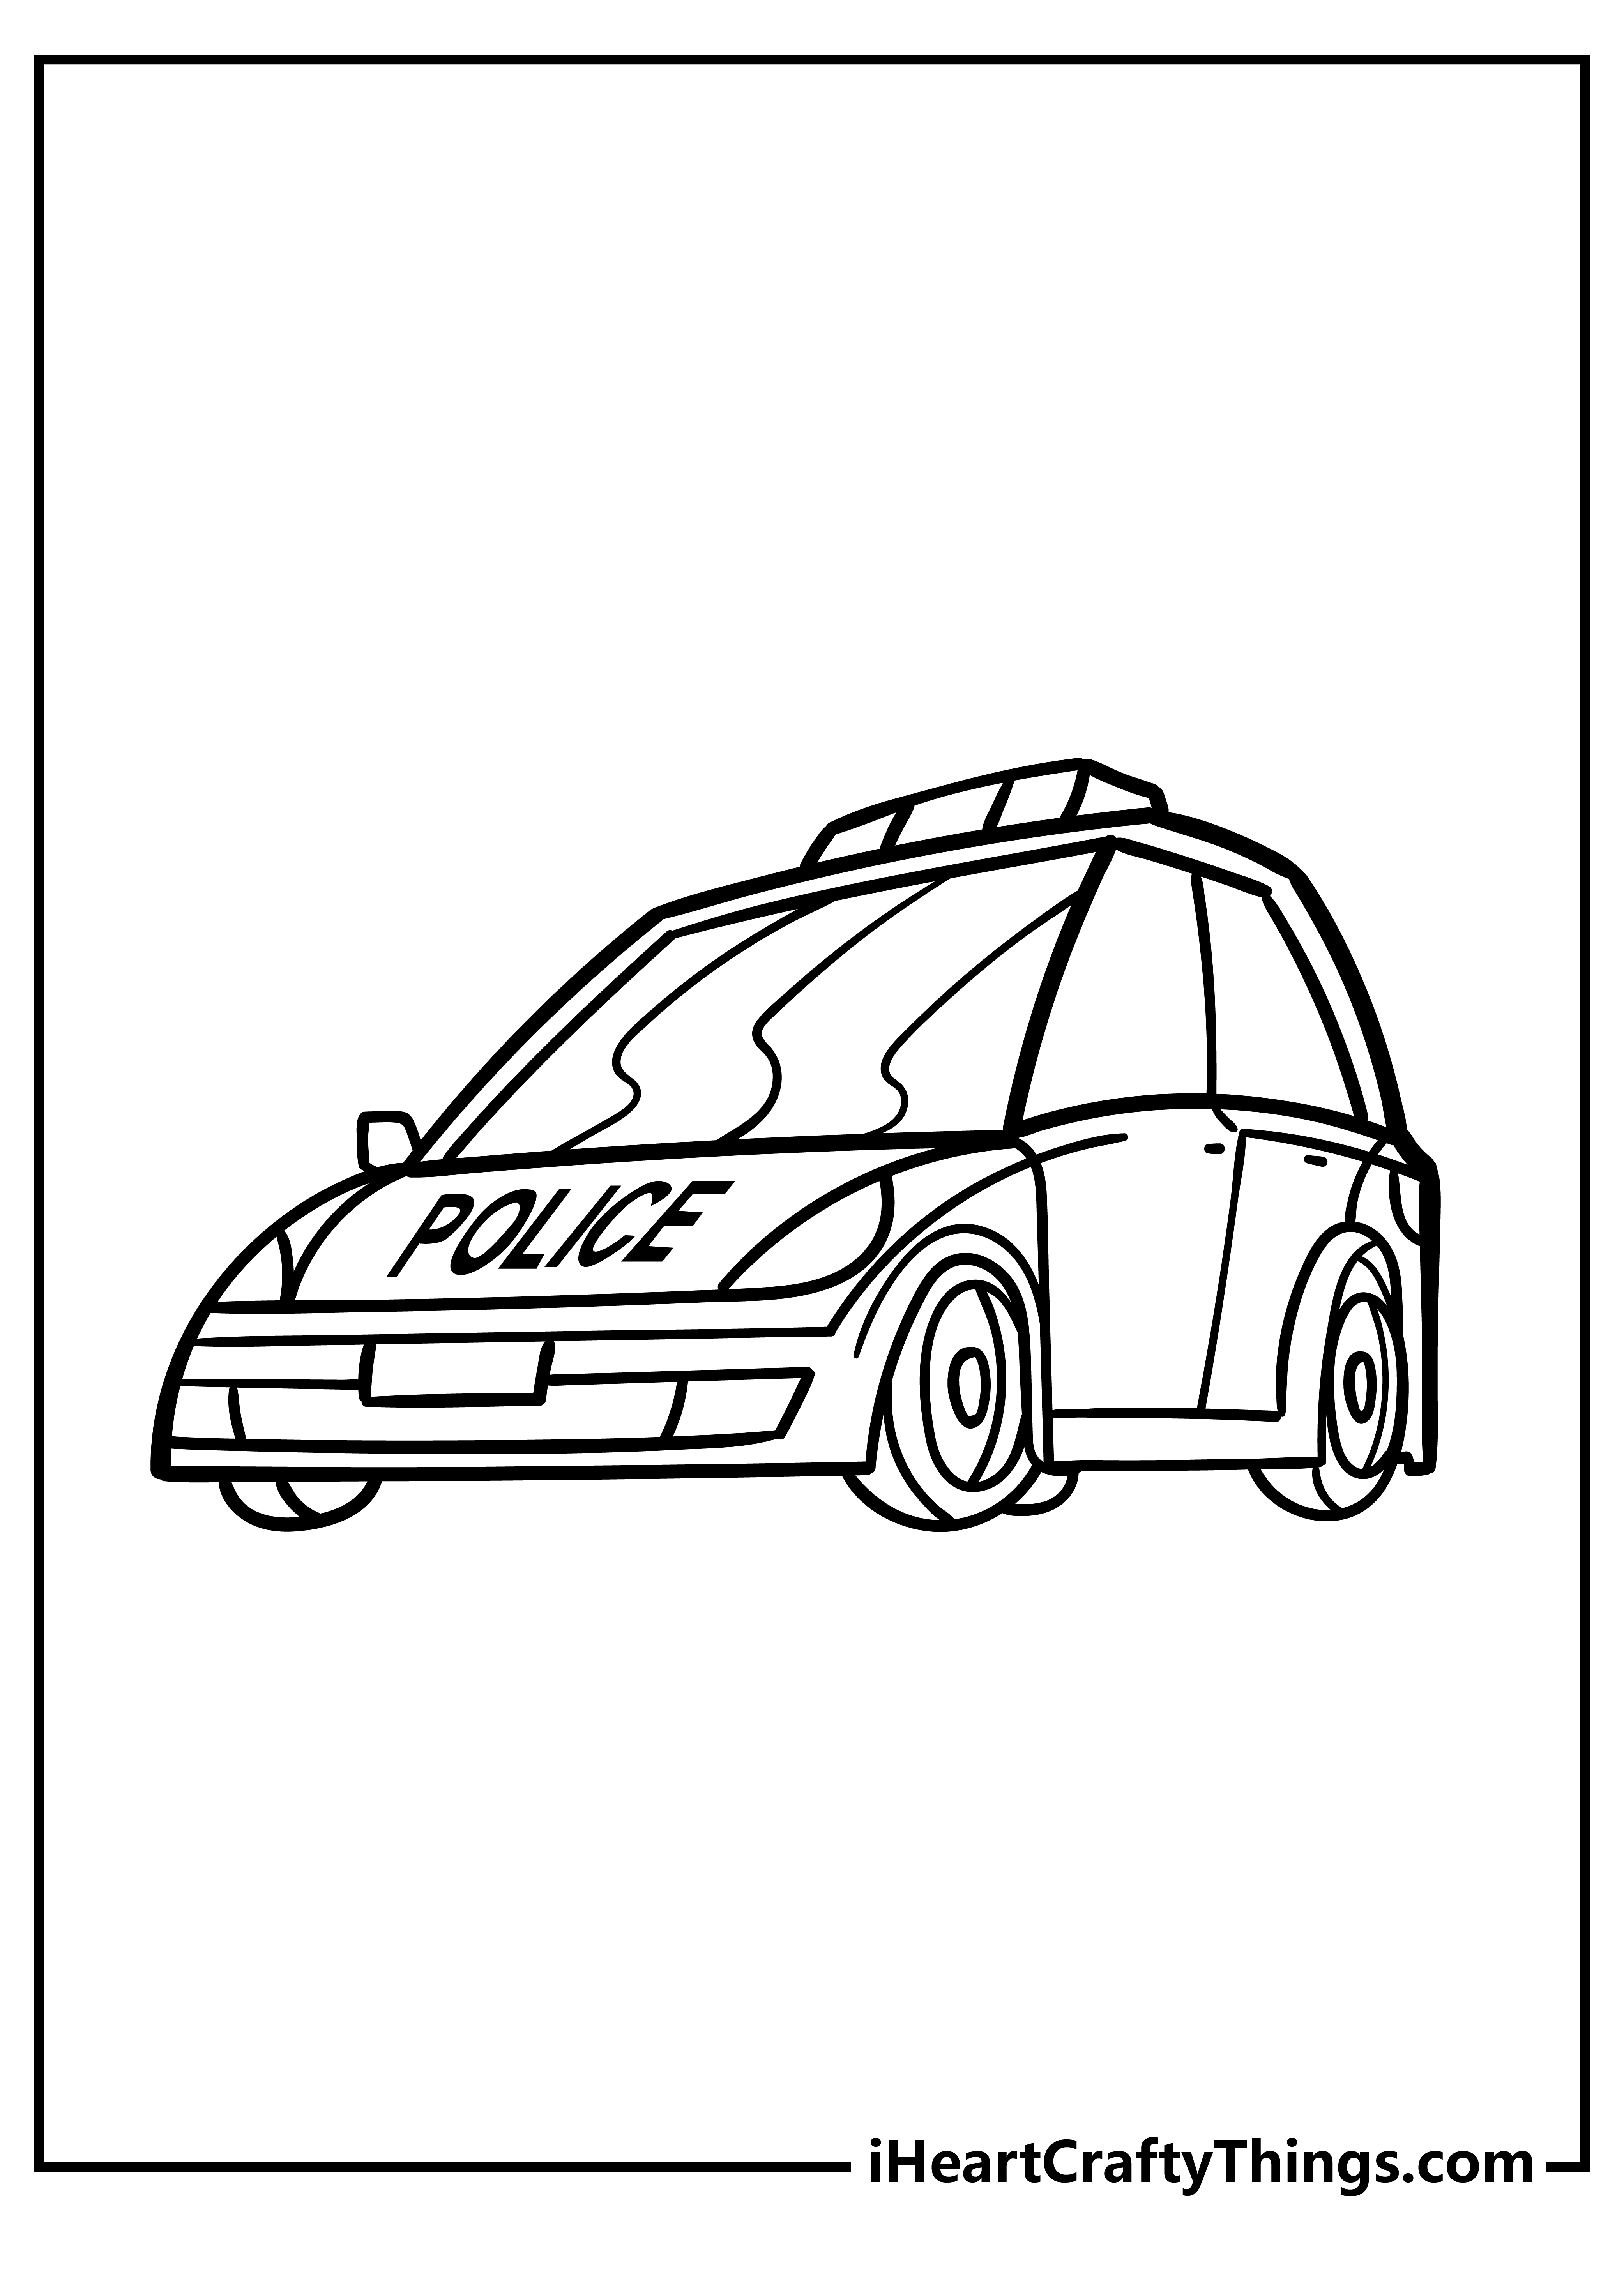 Police Car Coloring Book for adults free download